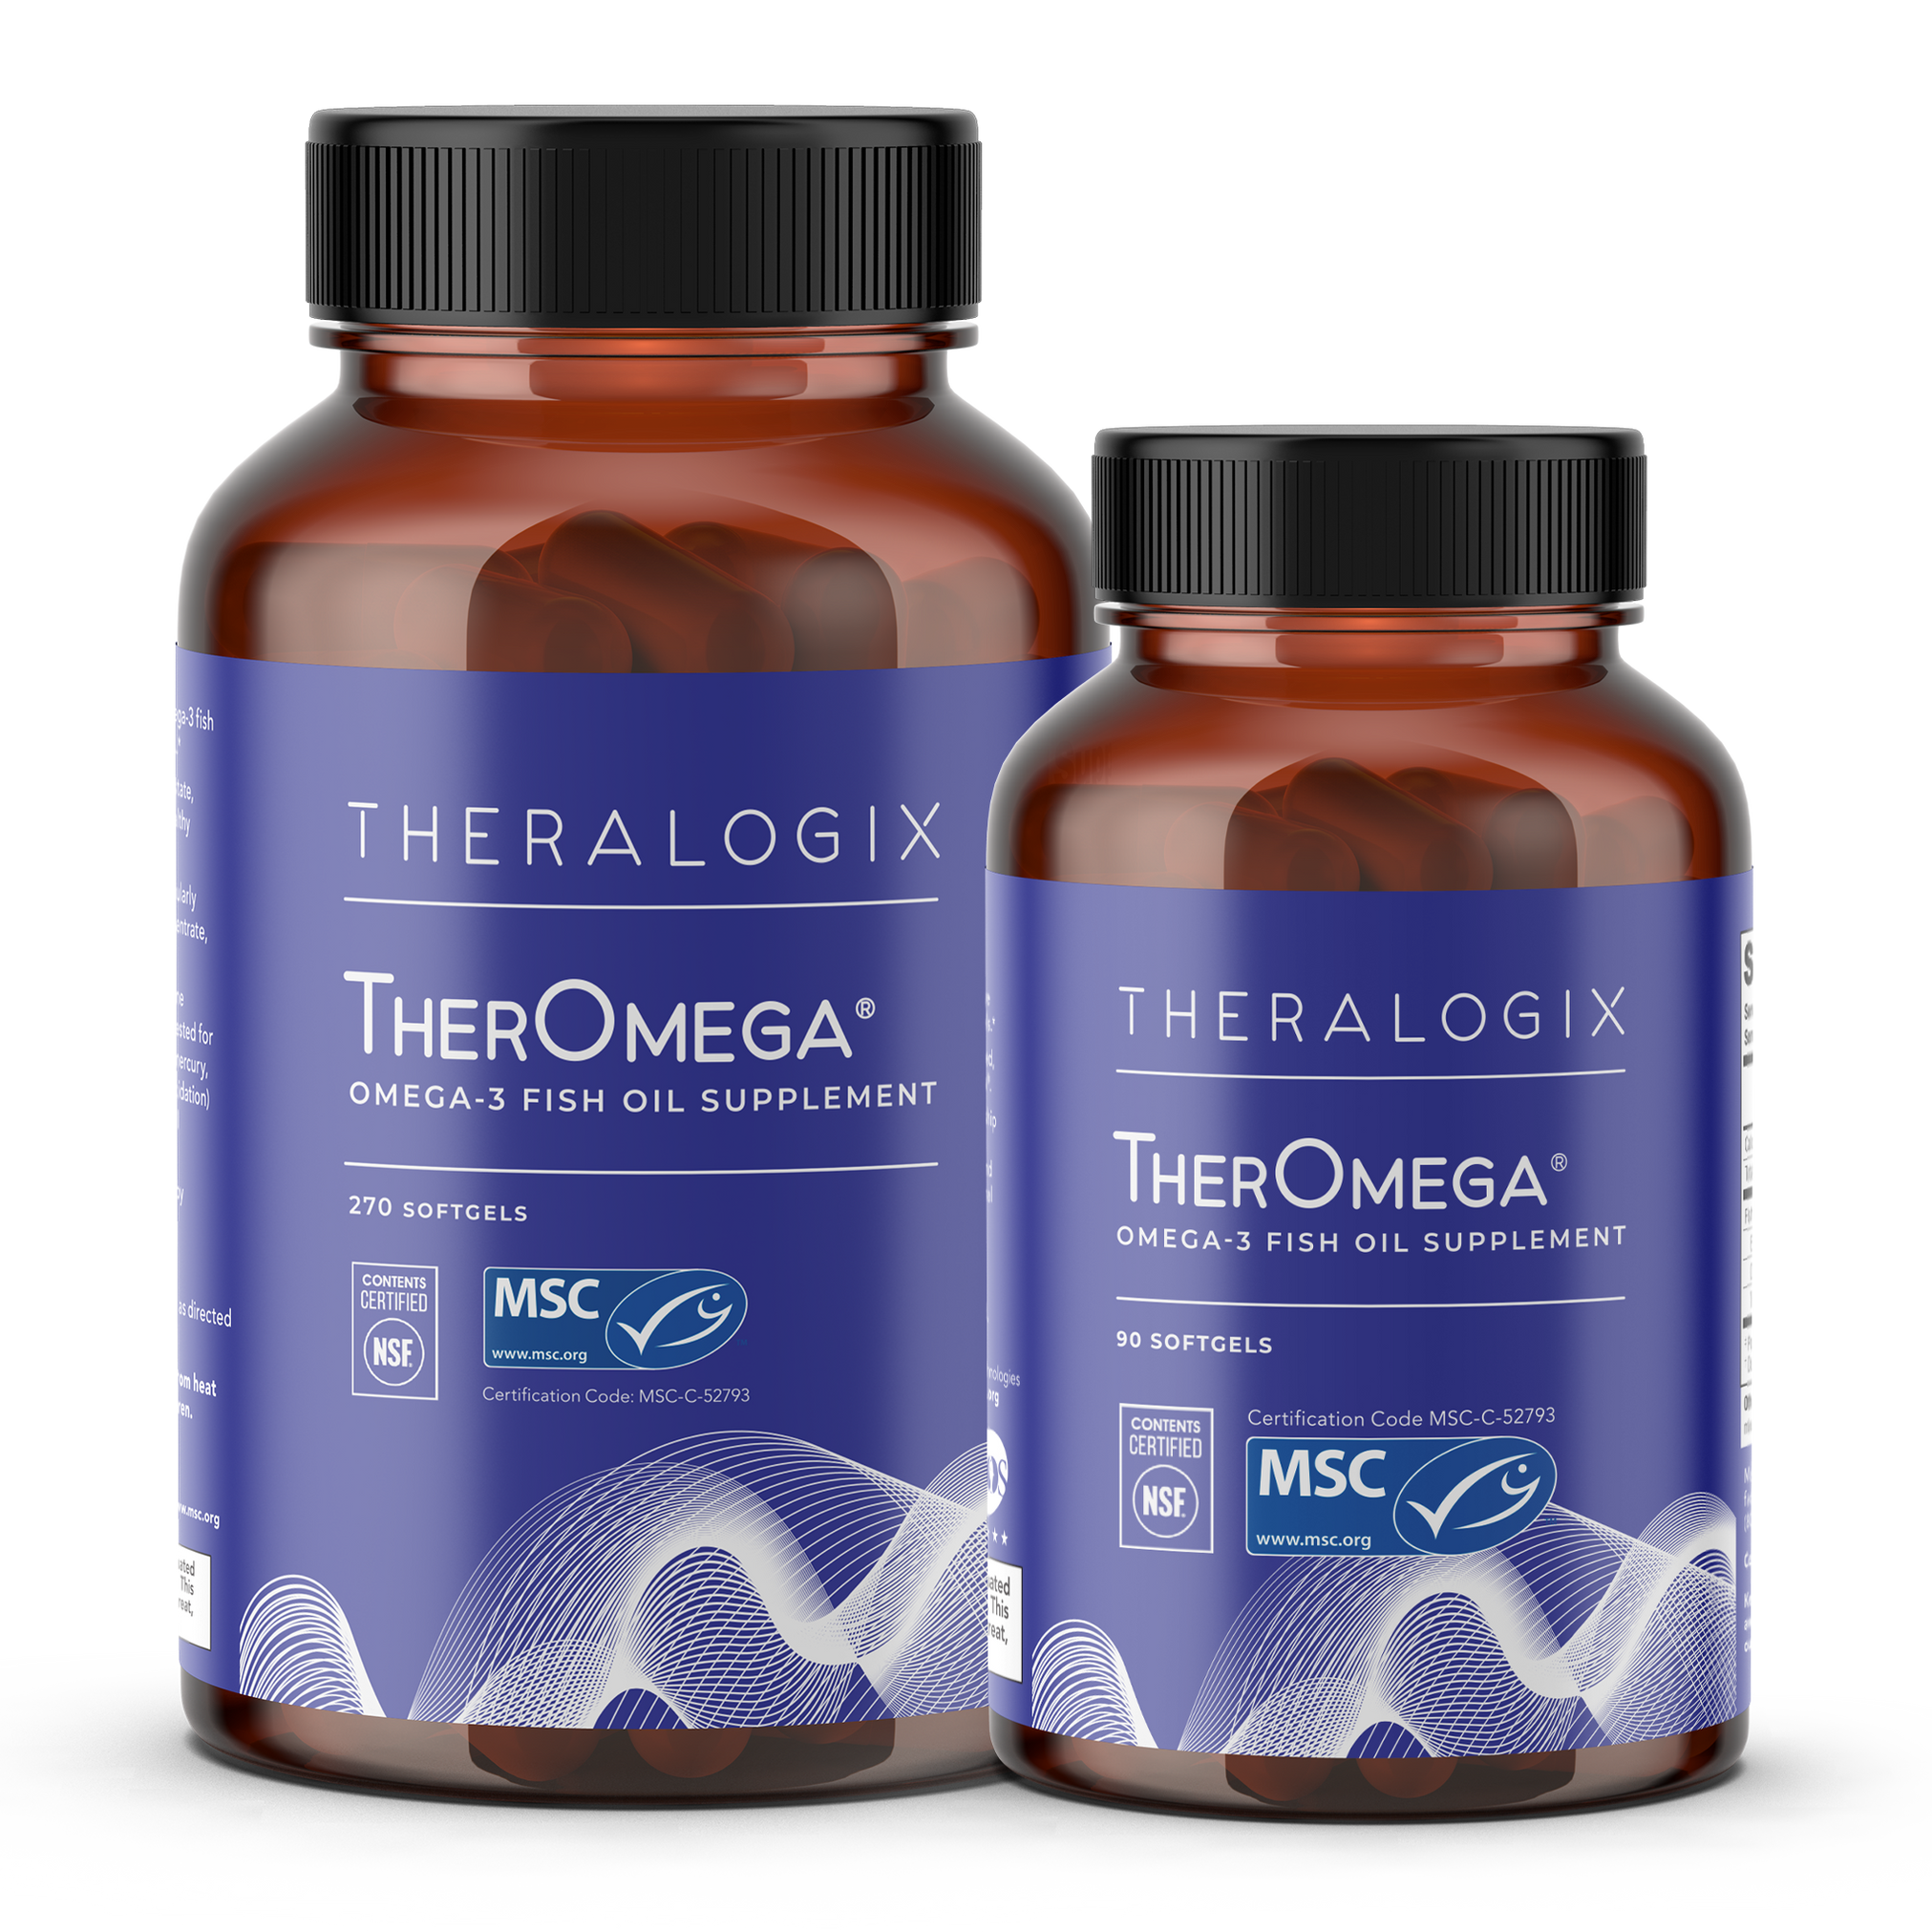 Physician recommended TherOmega Fish Oil supplements contain a highly purified omega-3 fish oil, sourced from 100% sustainable, wild-caught Alaska Pollock from the Bering Sea and the Gulf of Alaska.